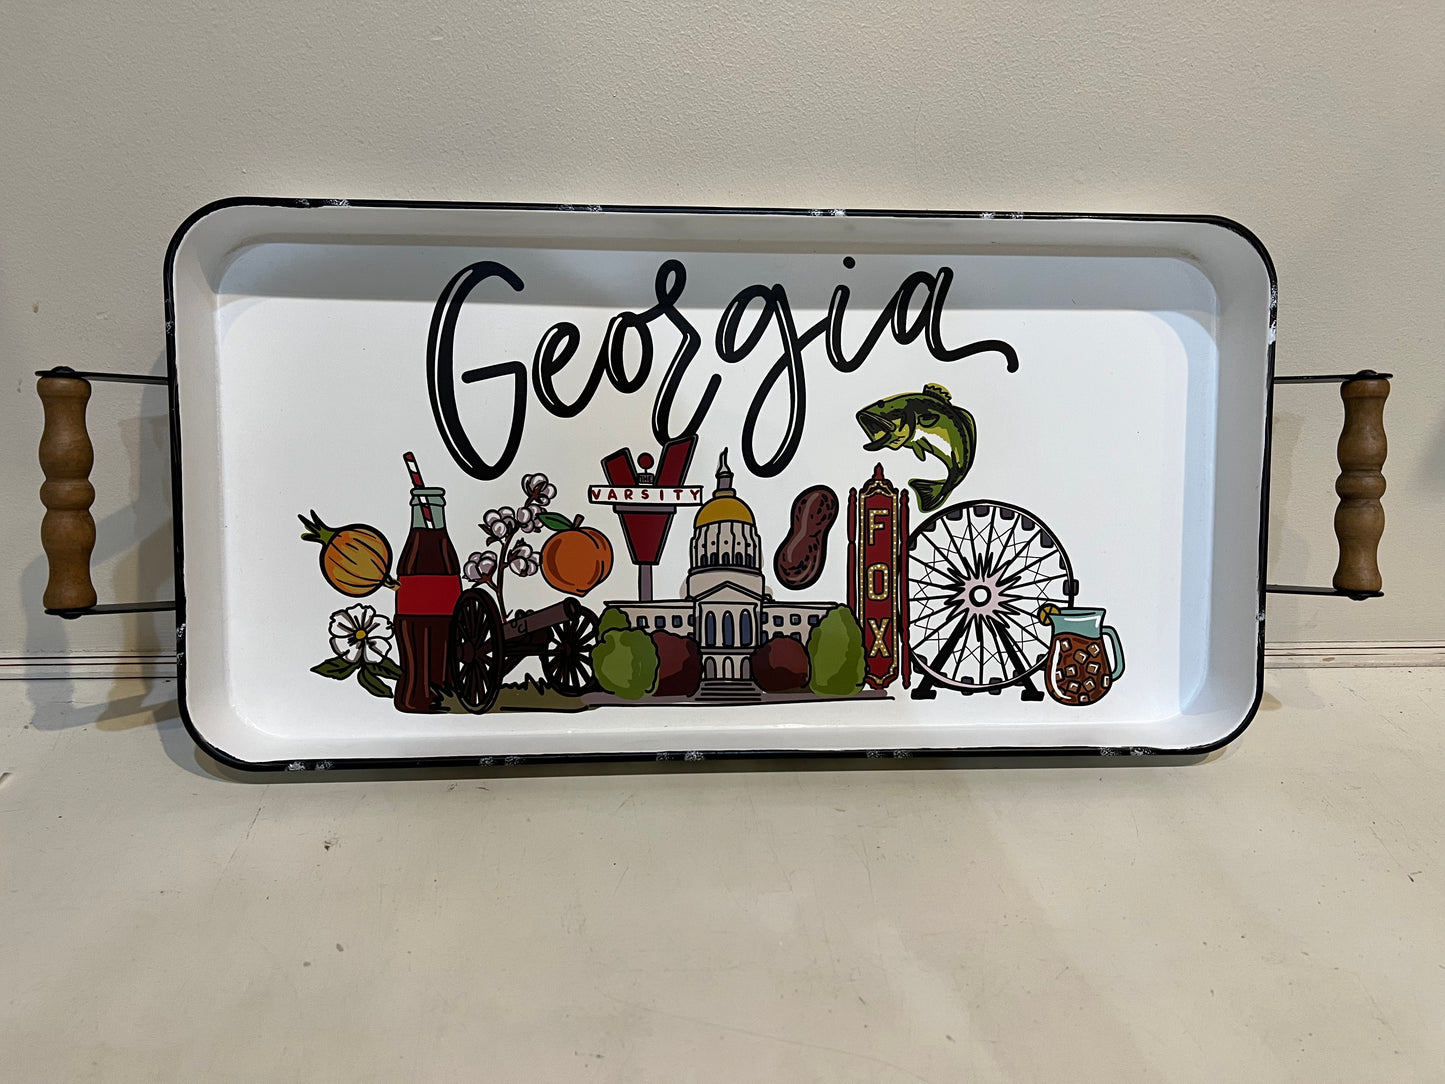 White tray with depictions of the state of Georgia featuring the state name.